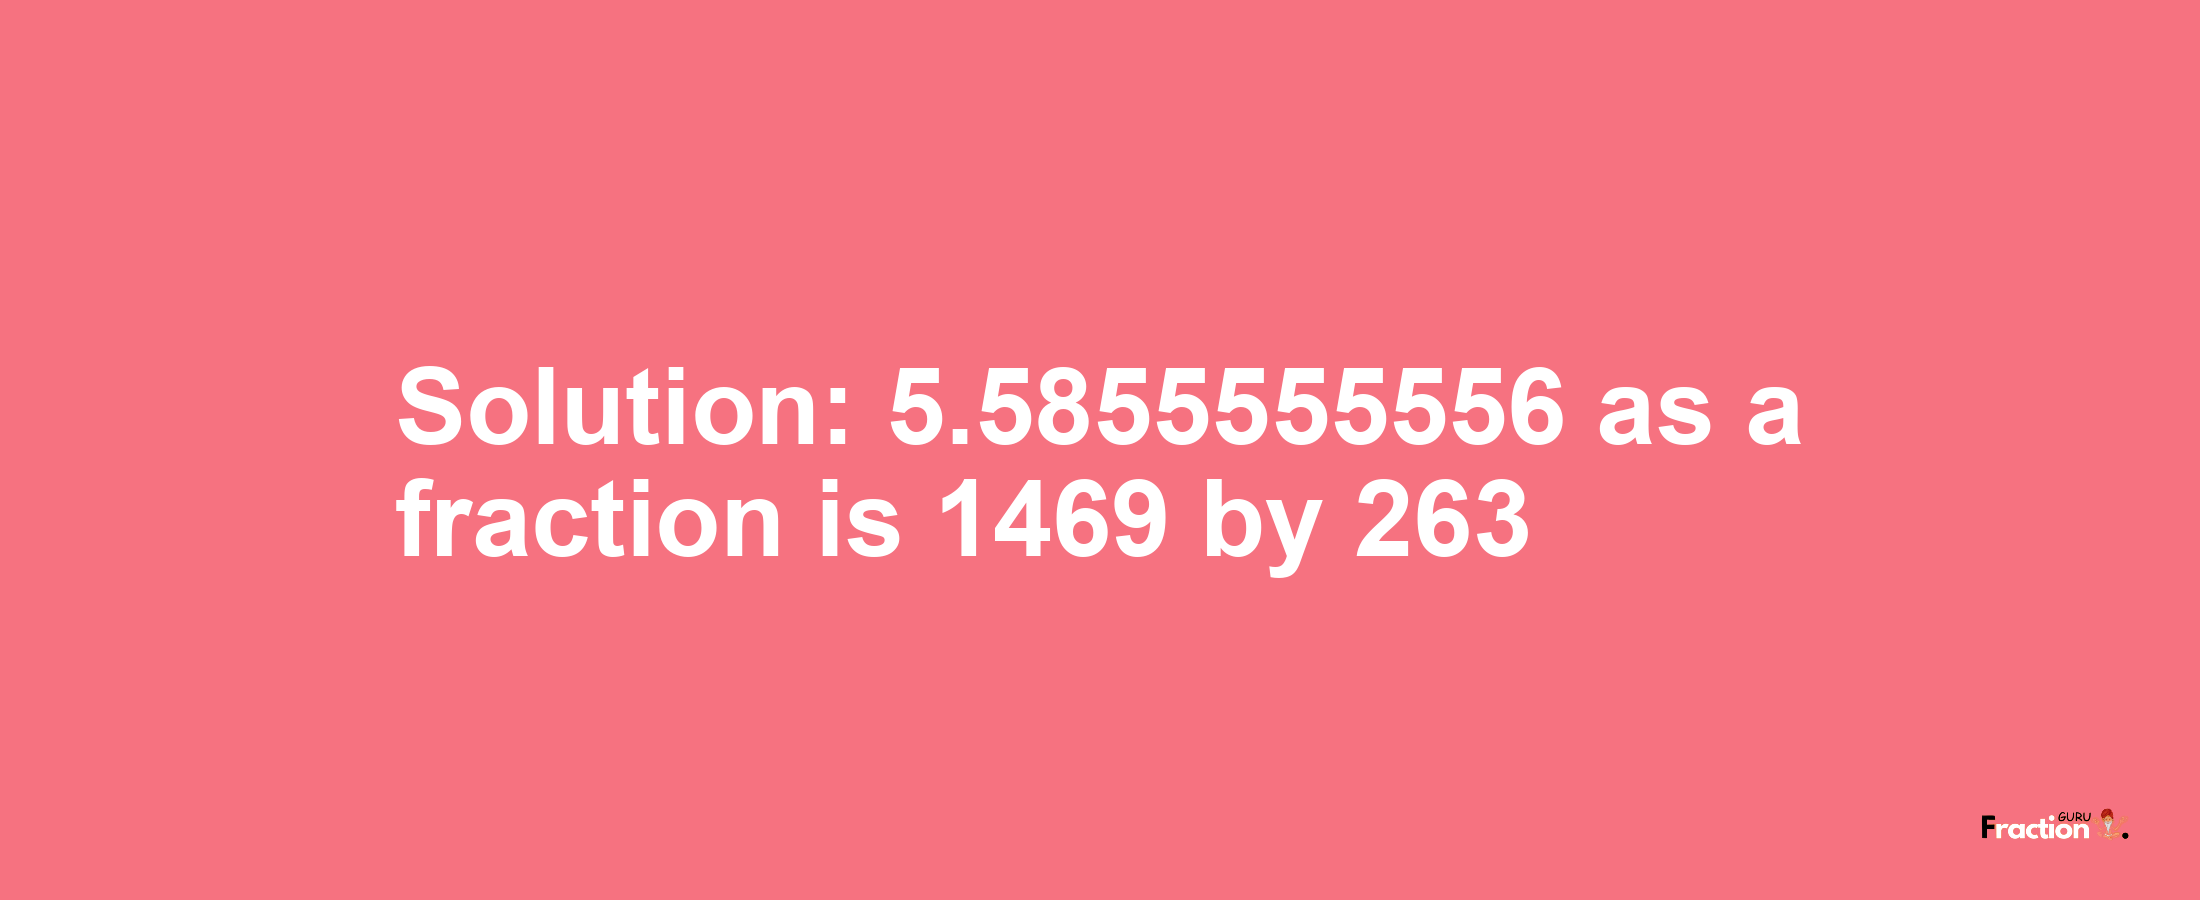 Solution:5.5855555556 as a fraction is 1469/263